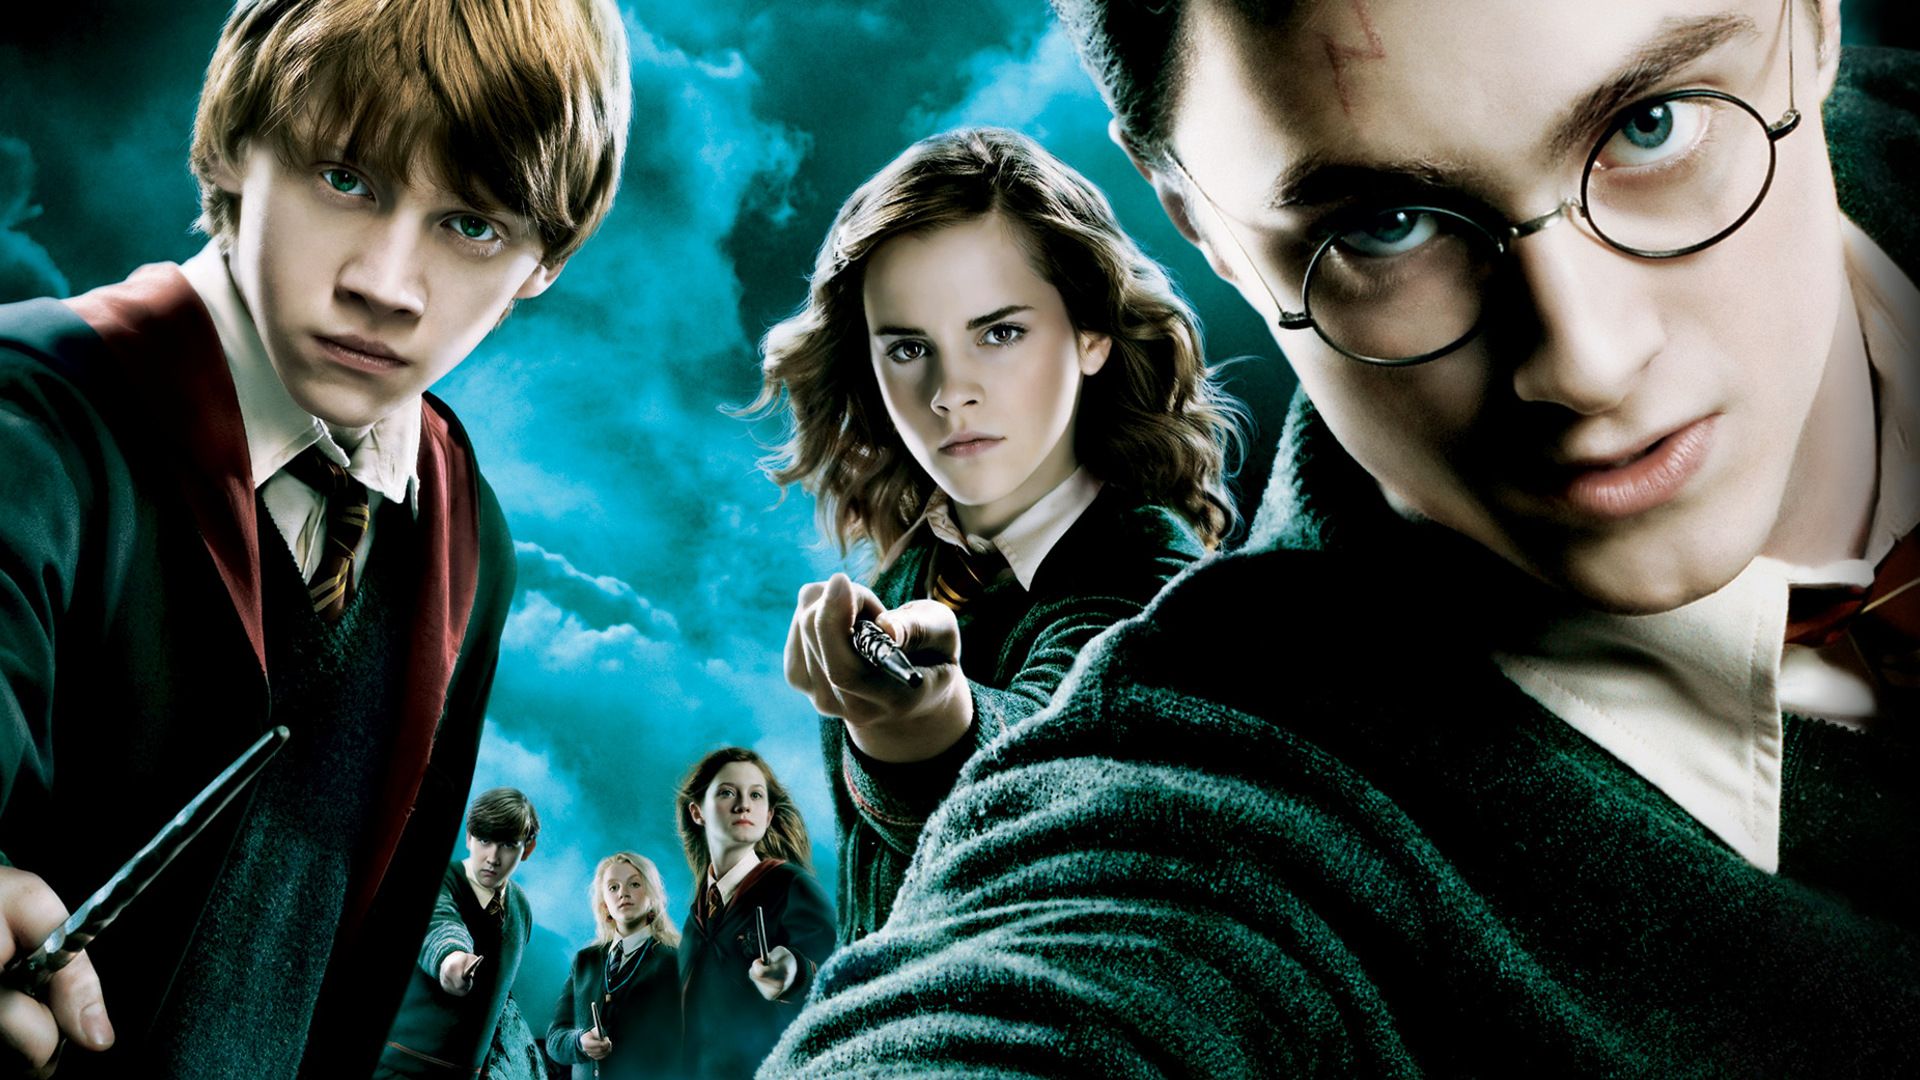 Harry Potter And The Order Of The Phoenix 10 Things The Movie Changed